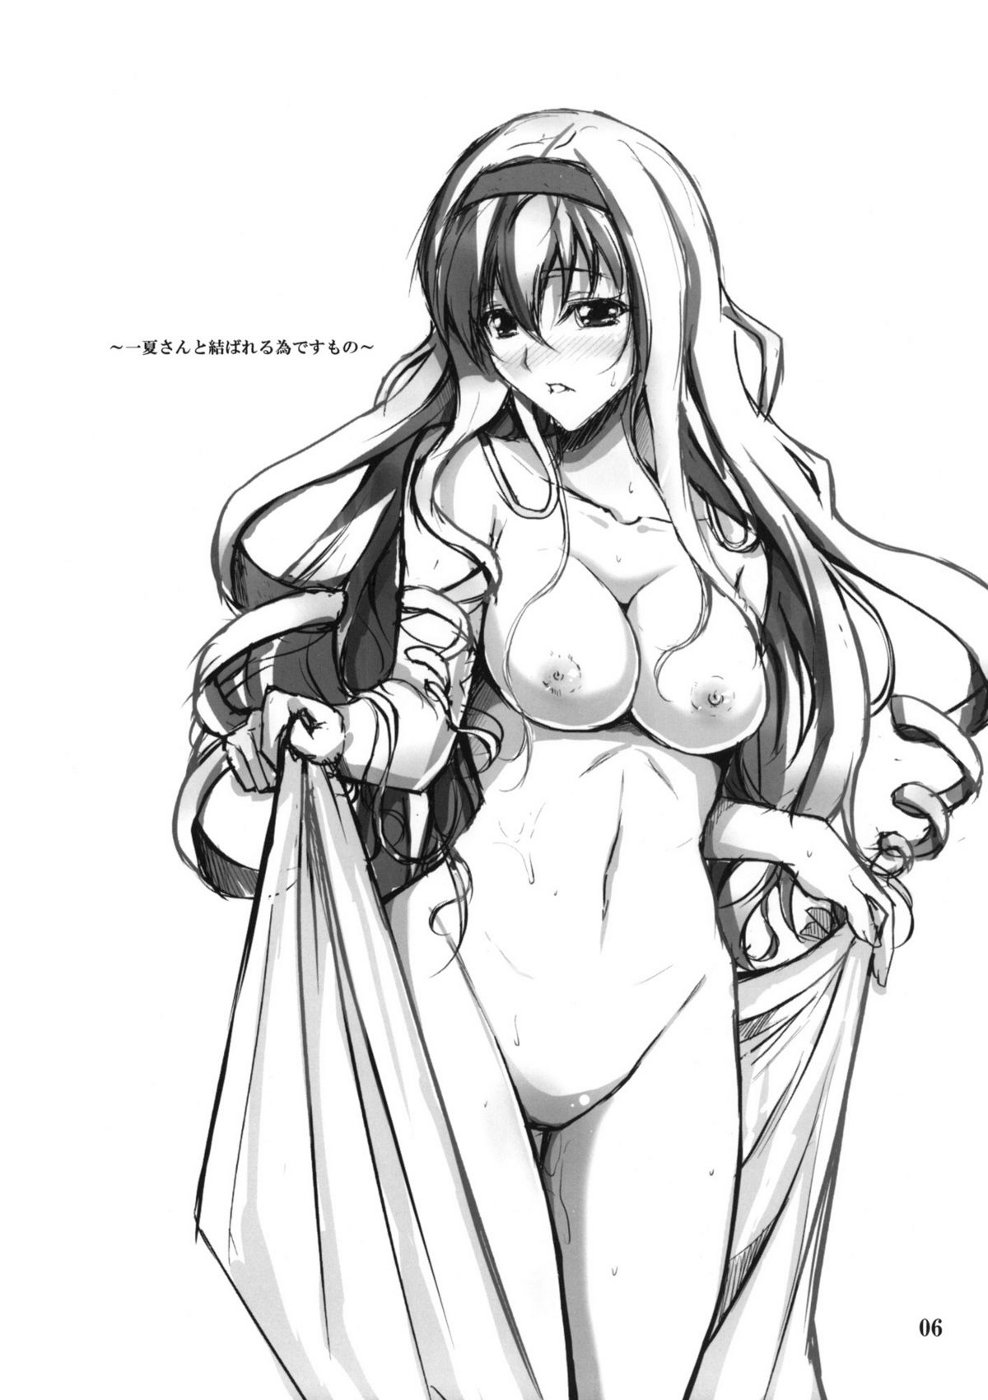 (SC51) [RED CROWN (Ishigami Kazui)] SE I Want To Have Sex WIth Cecilia!!! (Infinite Stratos) [English] (Kibitou4Life) (サンクリ51) [RED CROWN (石神一威)] SE セシリアとえっちな事したい!!! (IS) [英訳]